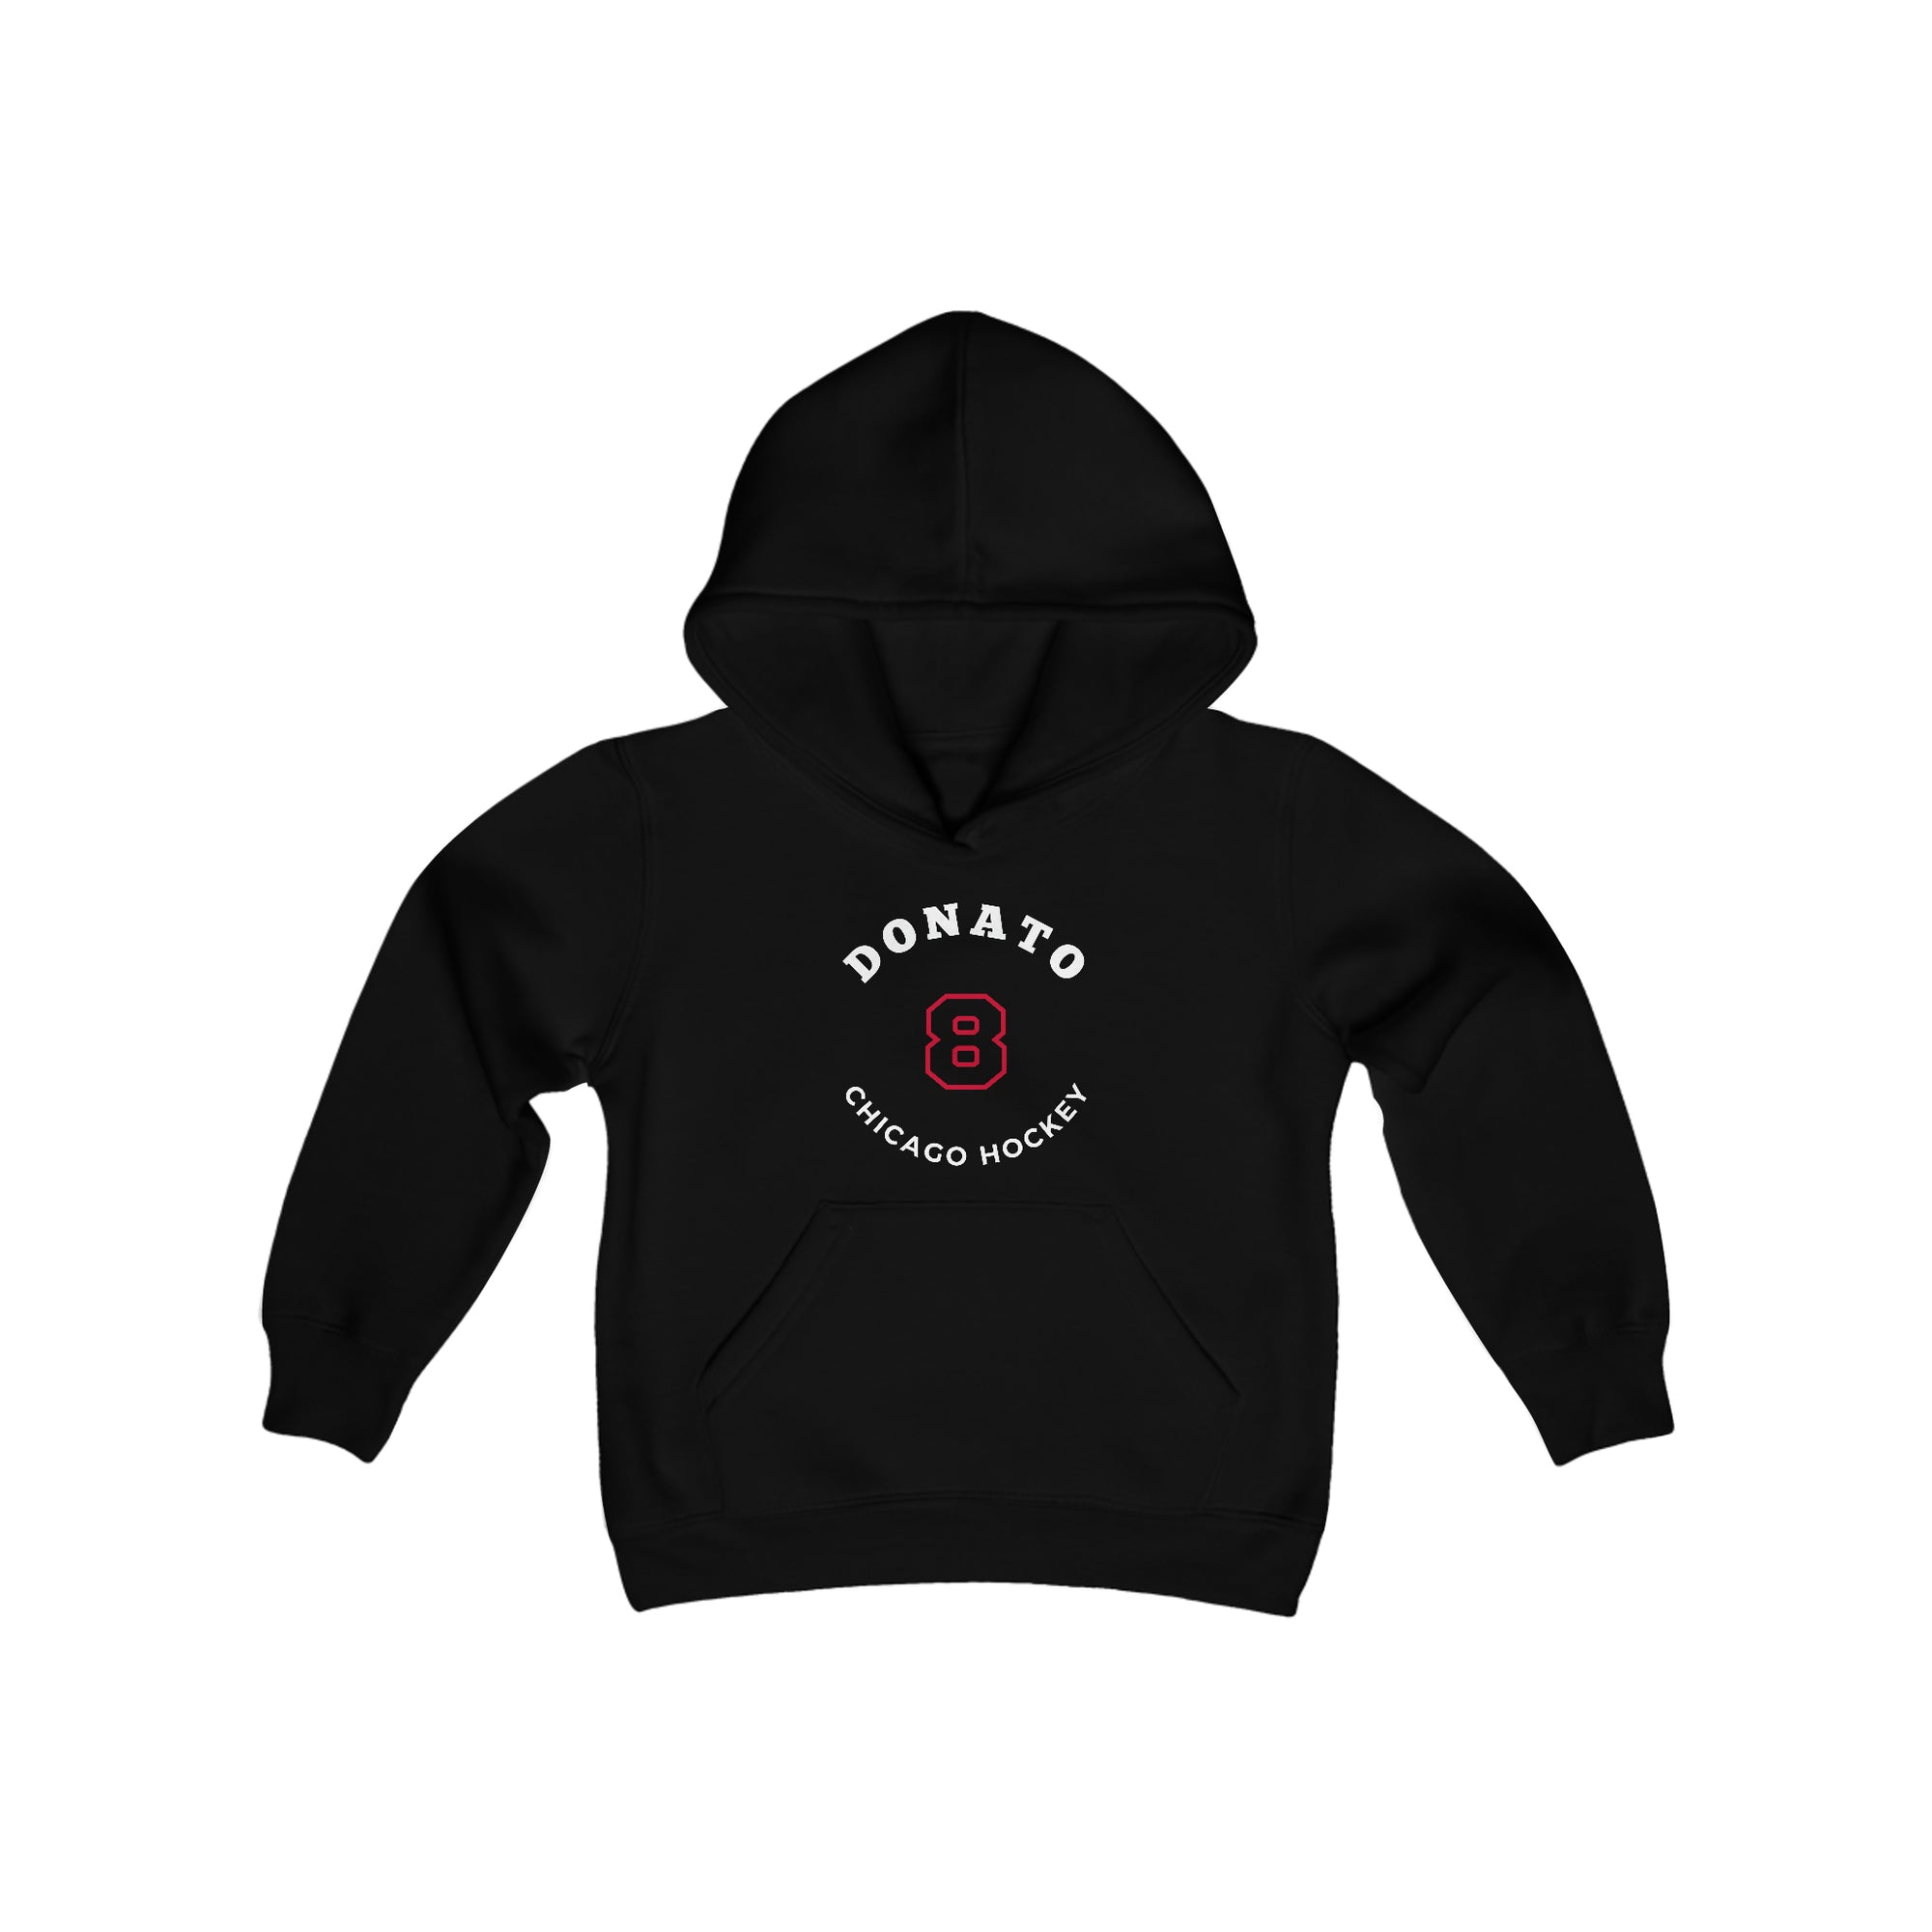 Donato 8 Chicago Hockey Number Arch Design Youth Hooded Sweatshirt